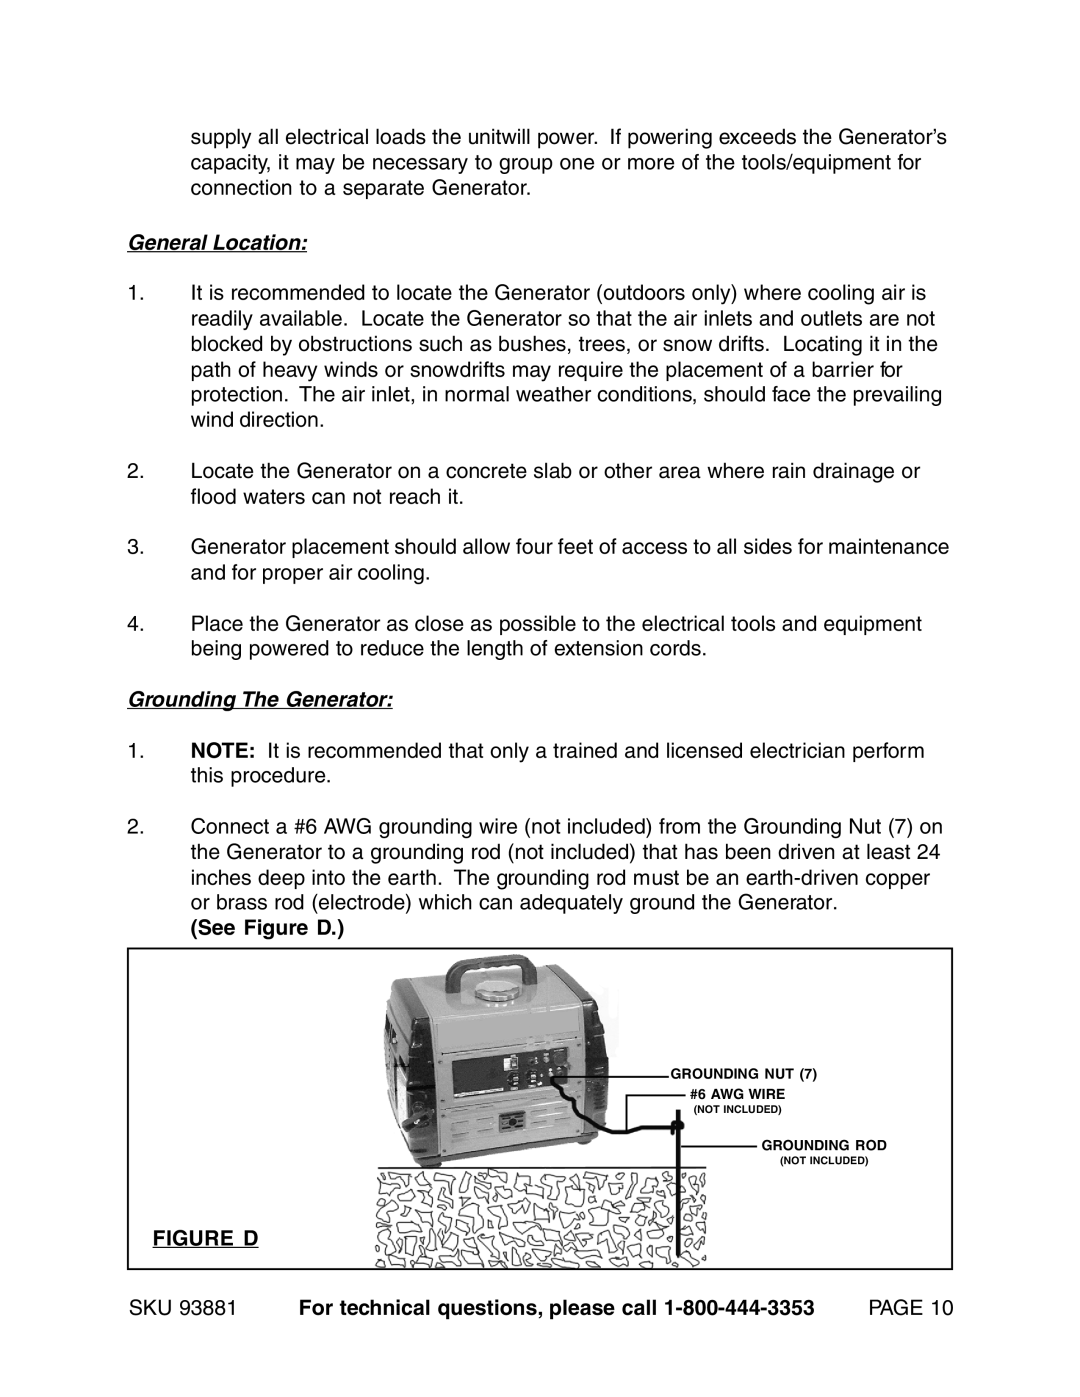 Chicago Electric 93881 General Location, Grounding The Generator, See Figure D, For technical questions, please call 